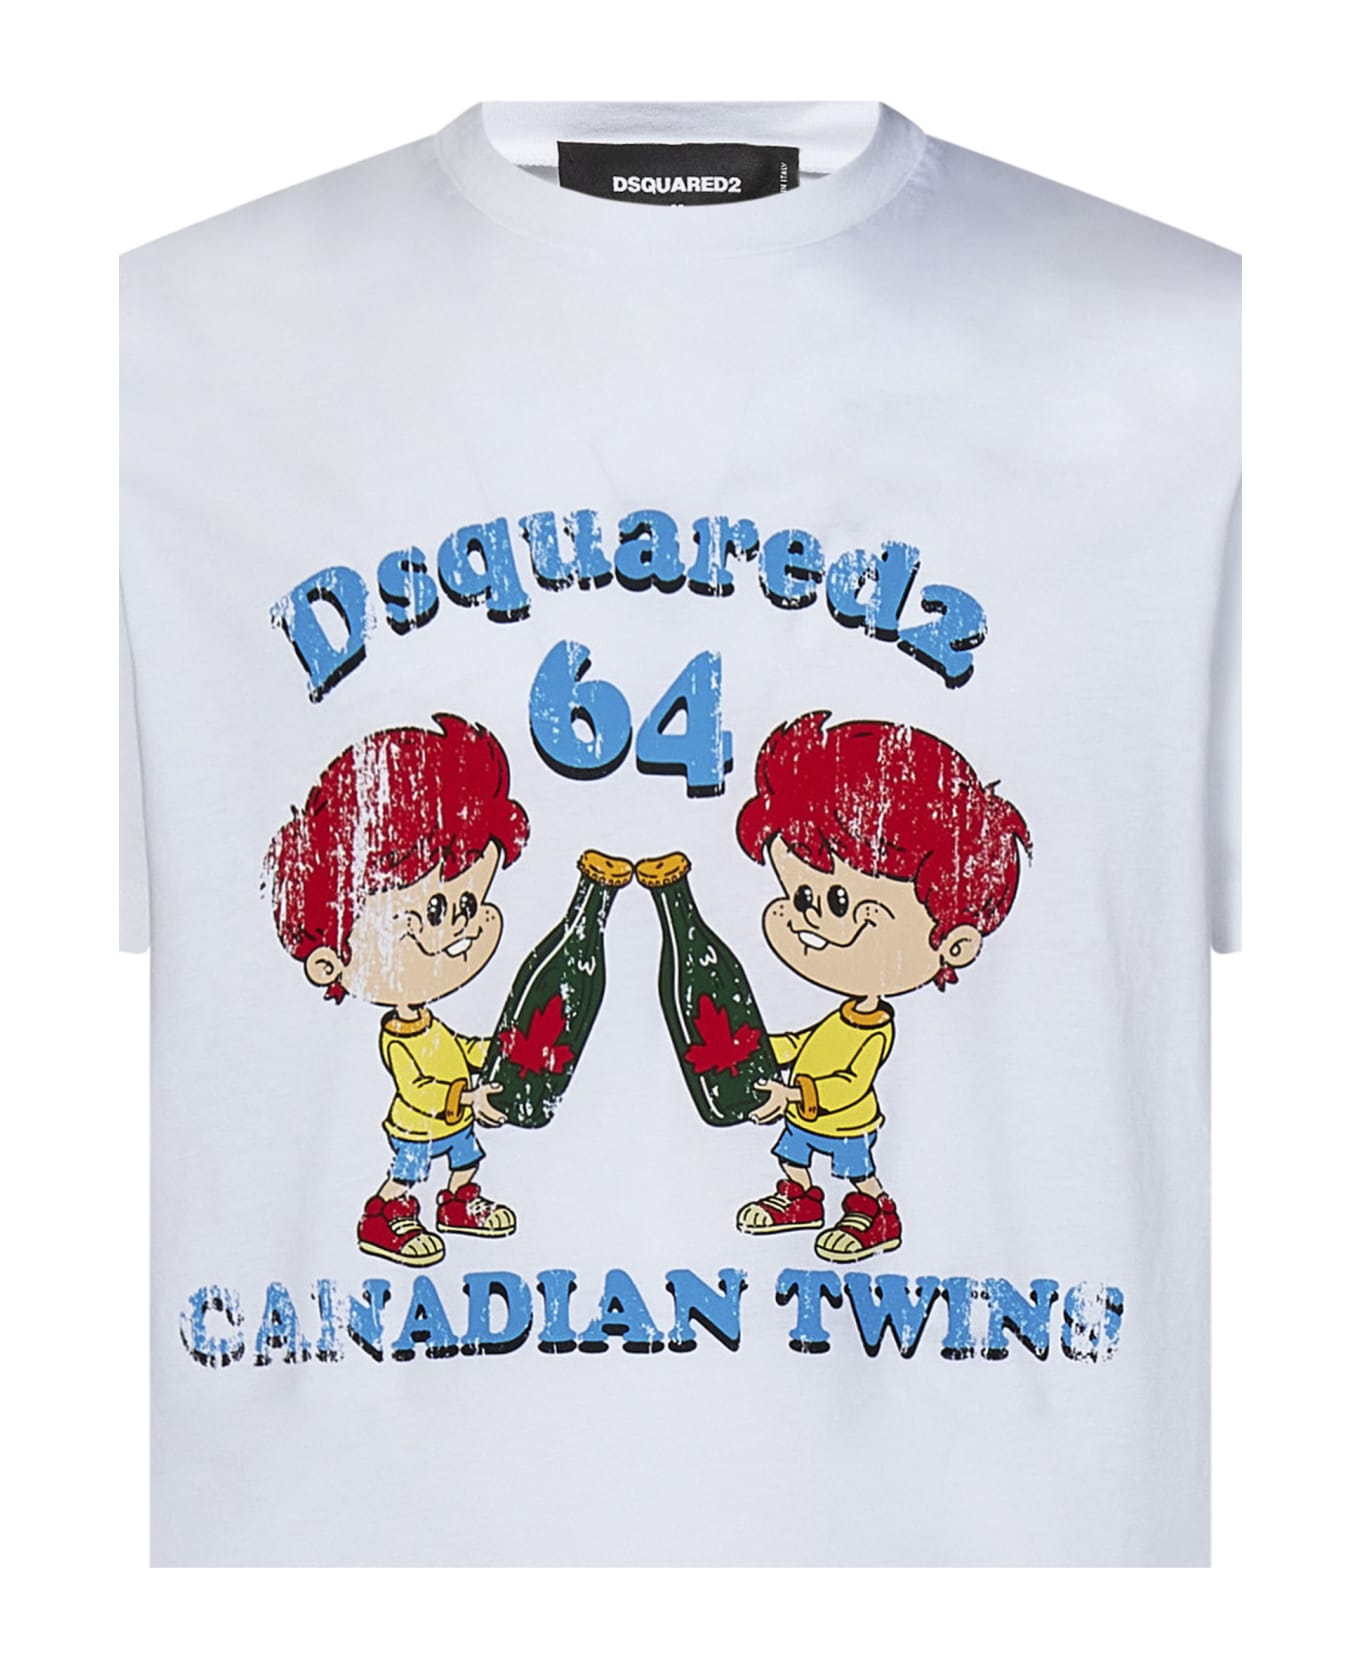 Dsquared2 Canadian Twins Cool Fit T-shirt - White